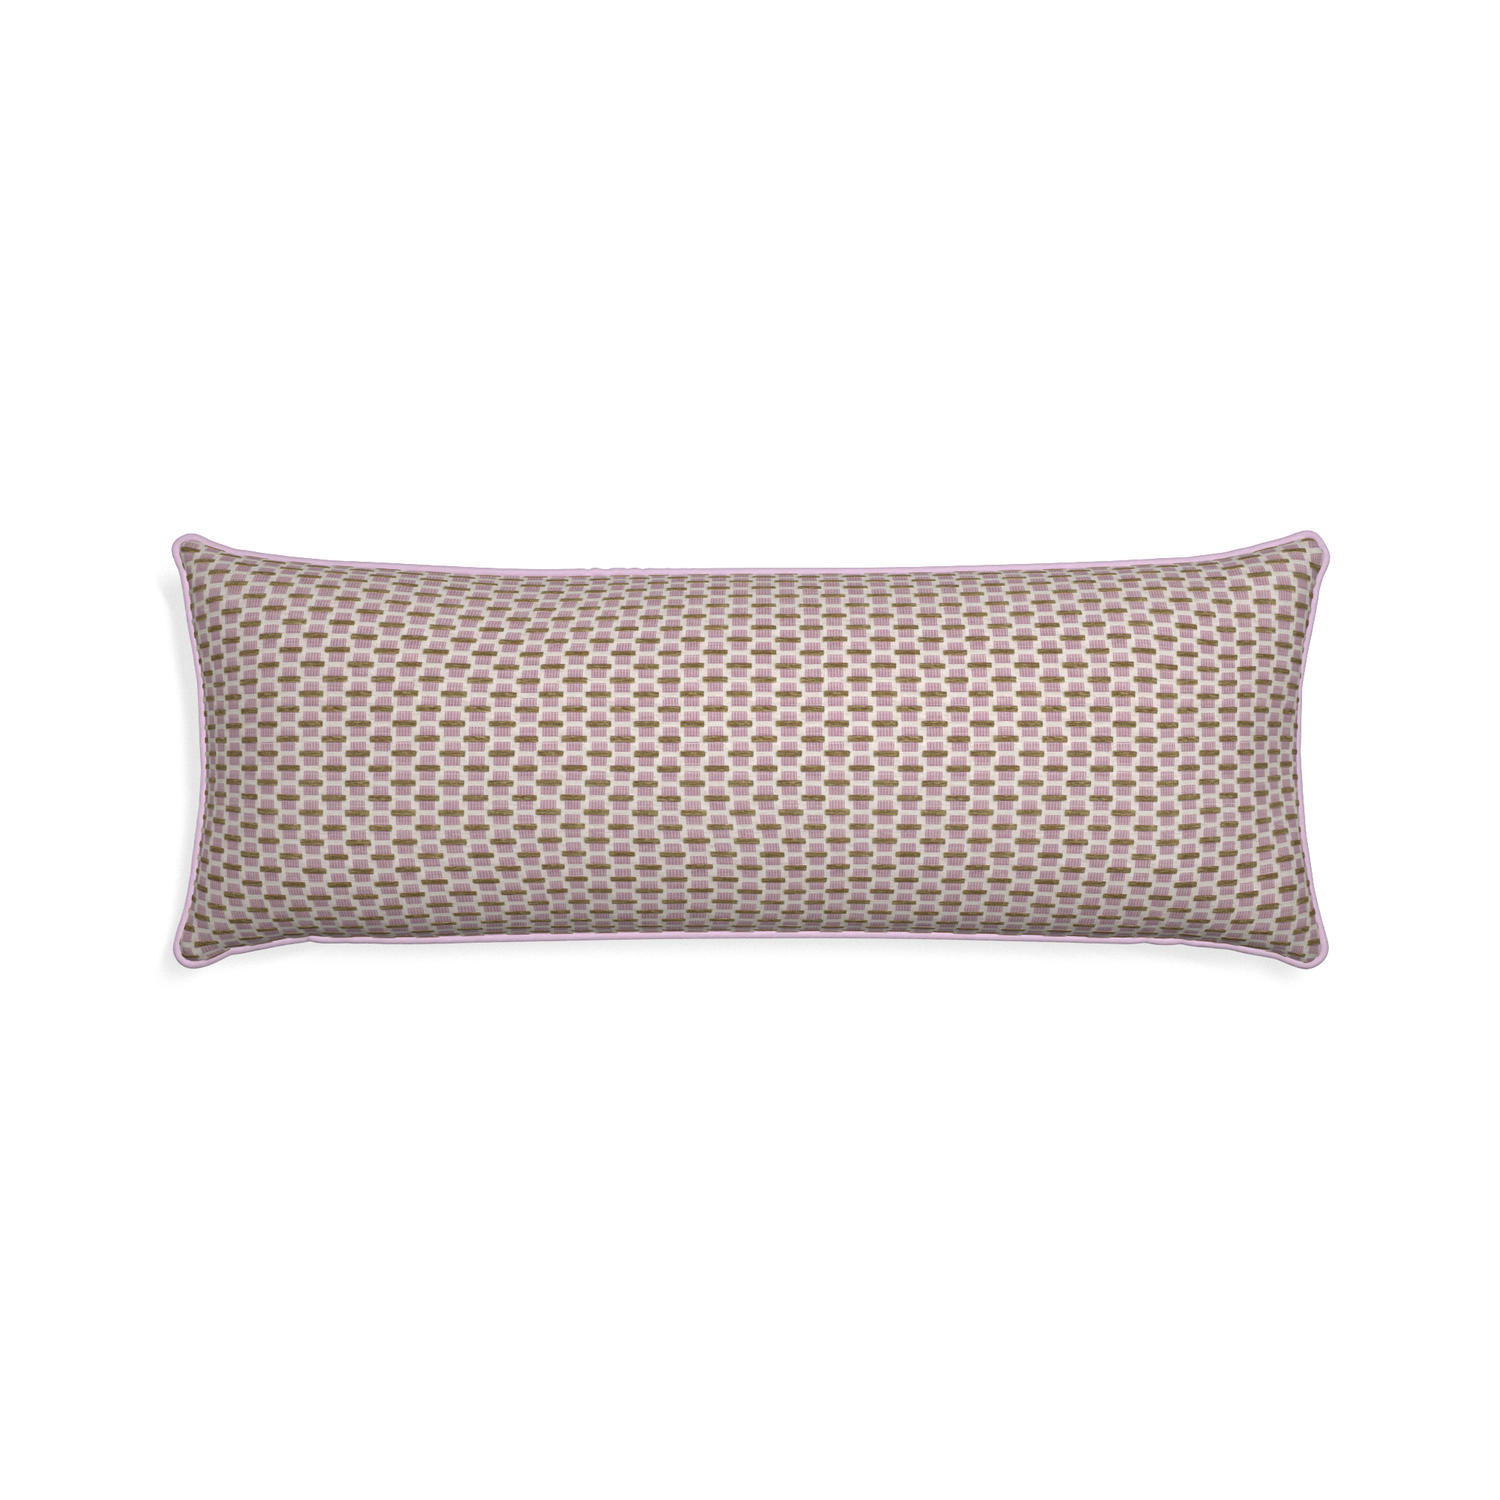 Xl-lumbar willow orchid custom pink geometric chenillepillow with l piping on white background